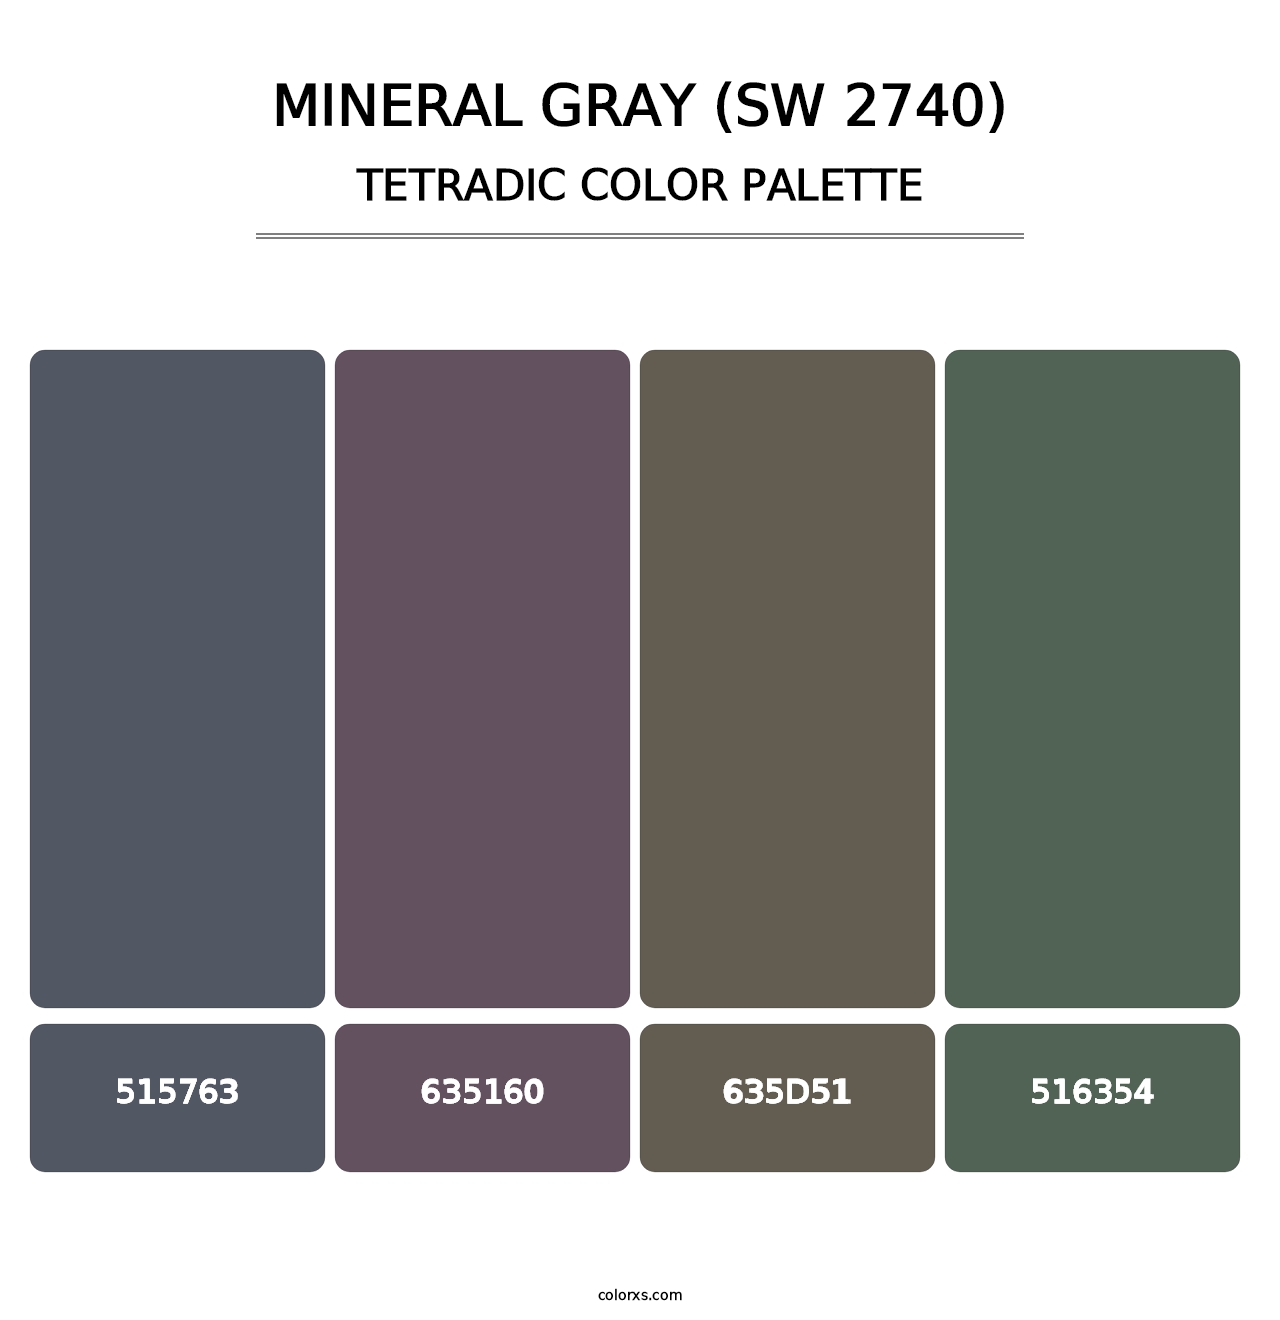 Mineral Gray (SW 2740) - Tetradic Color Palette